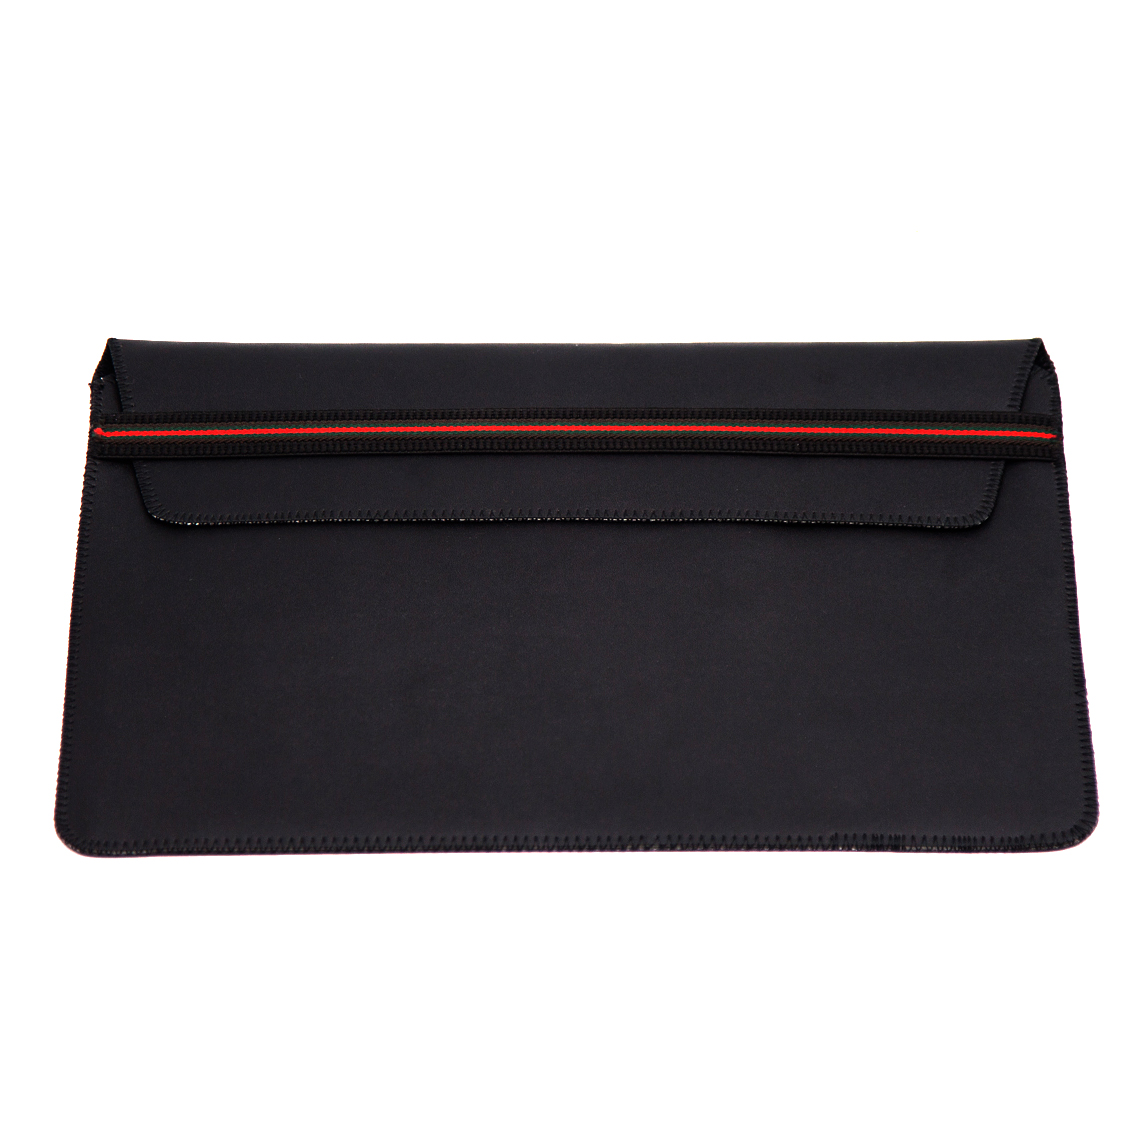 Teclast Laptop Bag Simple Fashion Laptop Sleeve Bag for 11.6 inch Laptop or Tablet for Teclast F5 BMAX Y11